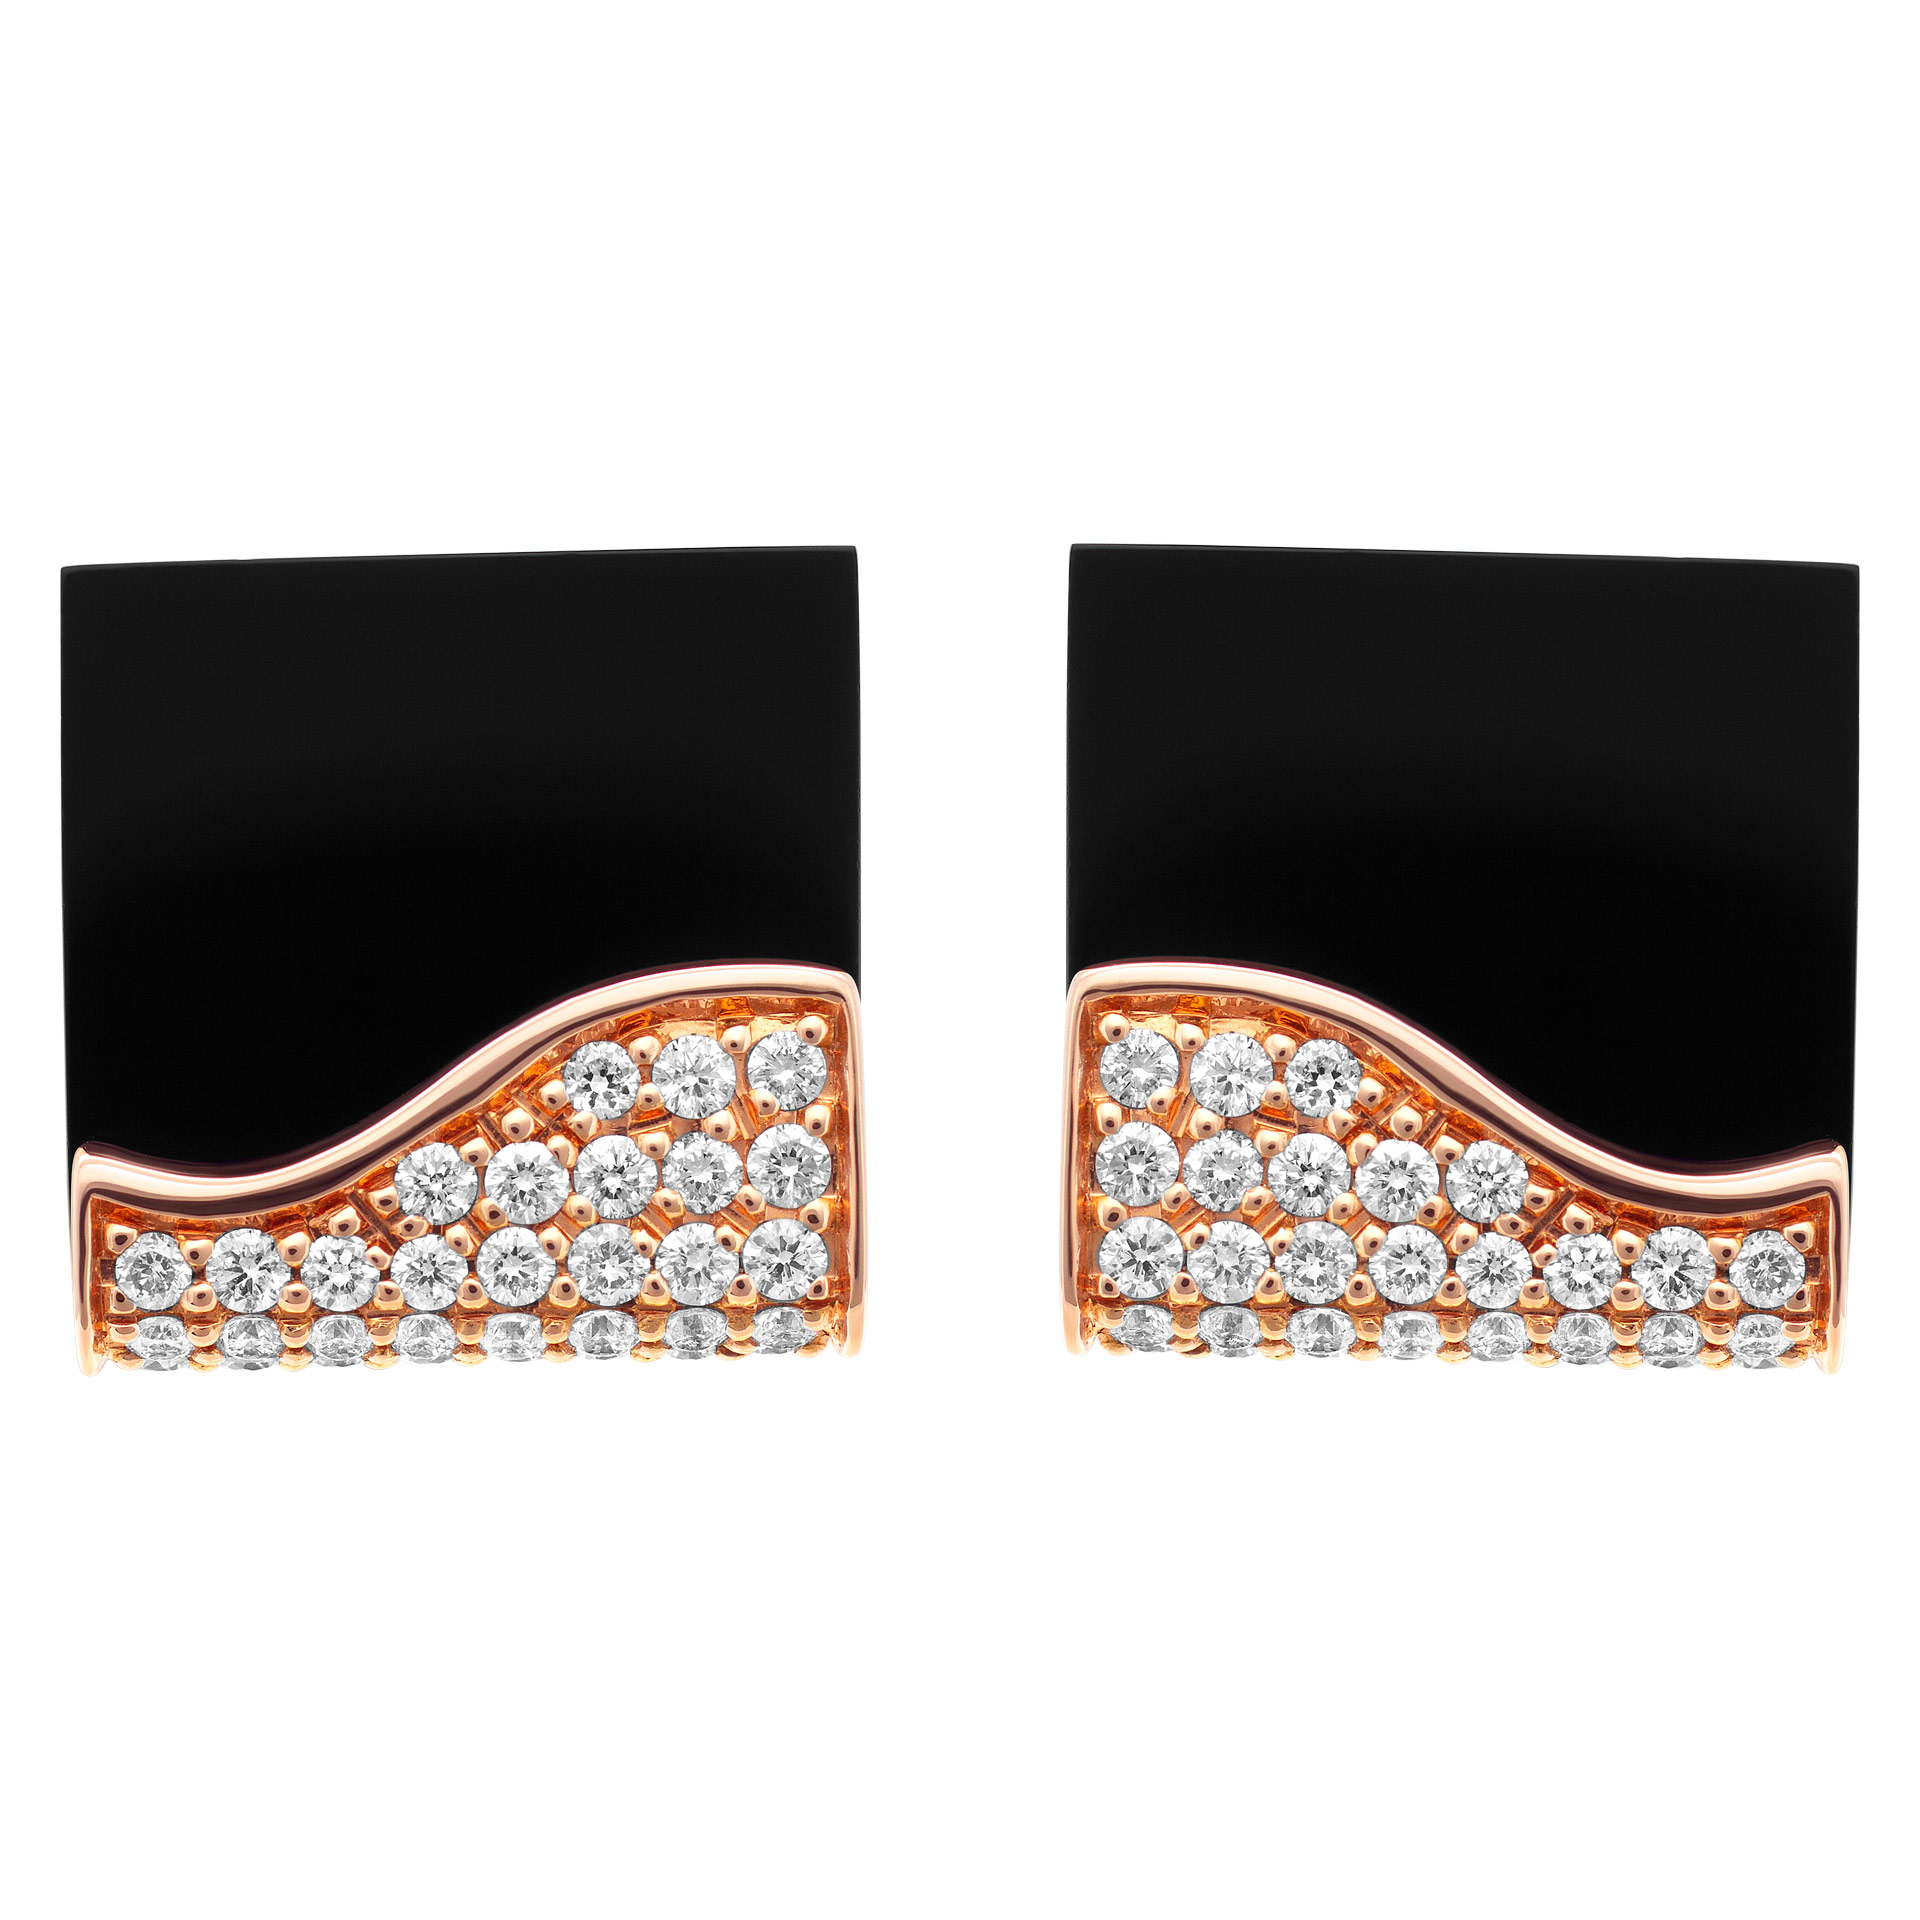 Onyx square cufflinks in 18k pink gold with 0.70 carat in diamond accent